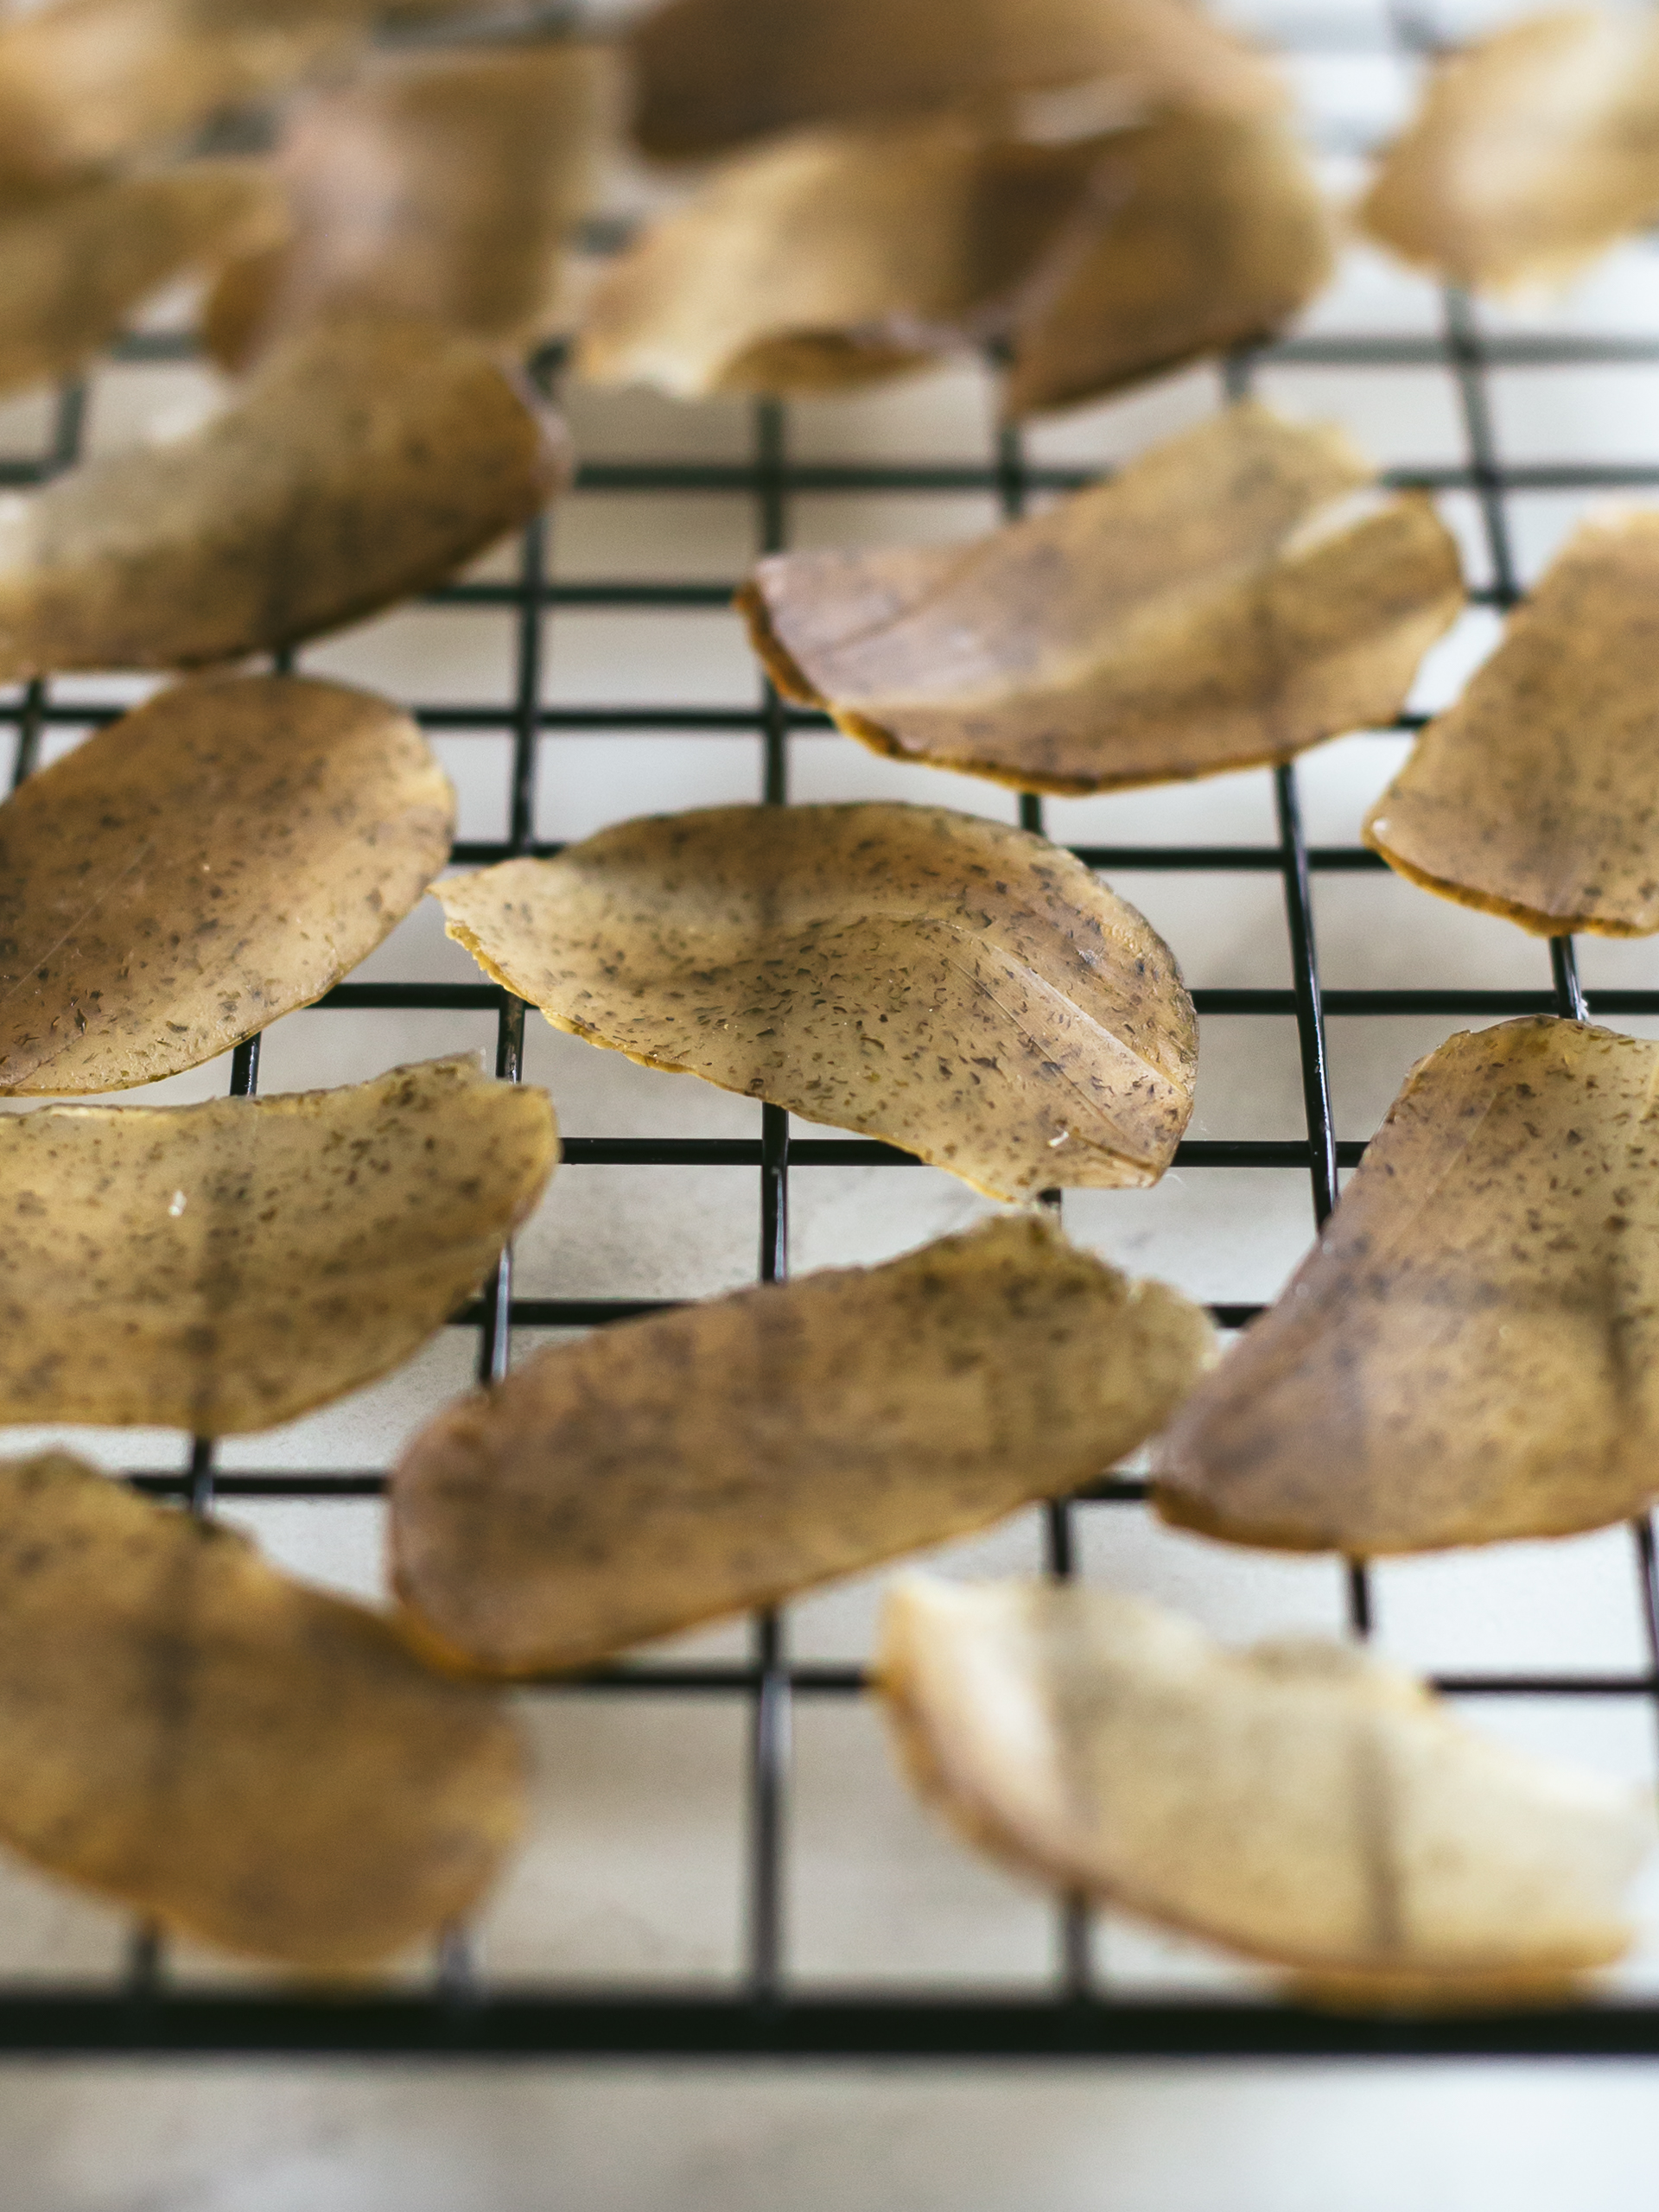 vegan prawn cracker chips with mushrooms dried on a tray